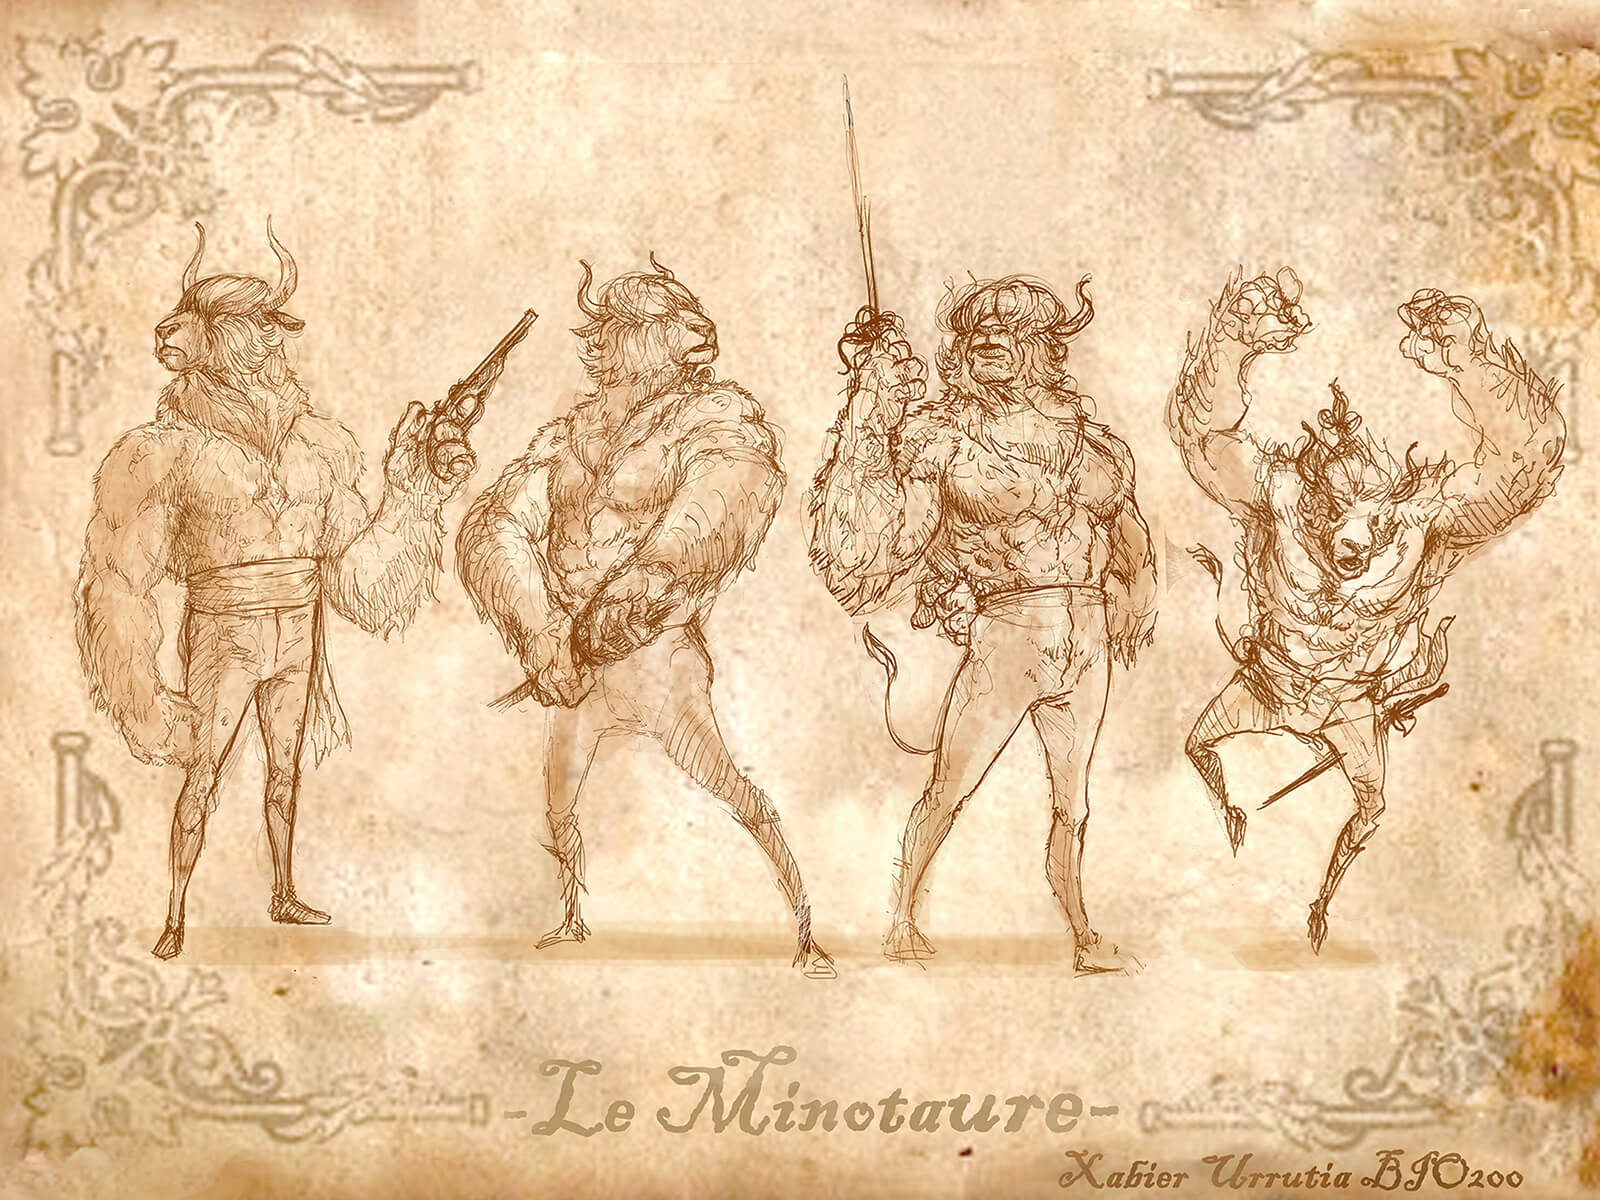 Black-and-white sketches of a minotaur wielding a rapier and a pistol, including its lair and description of its habits.